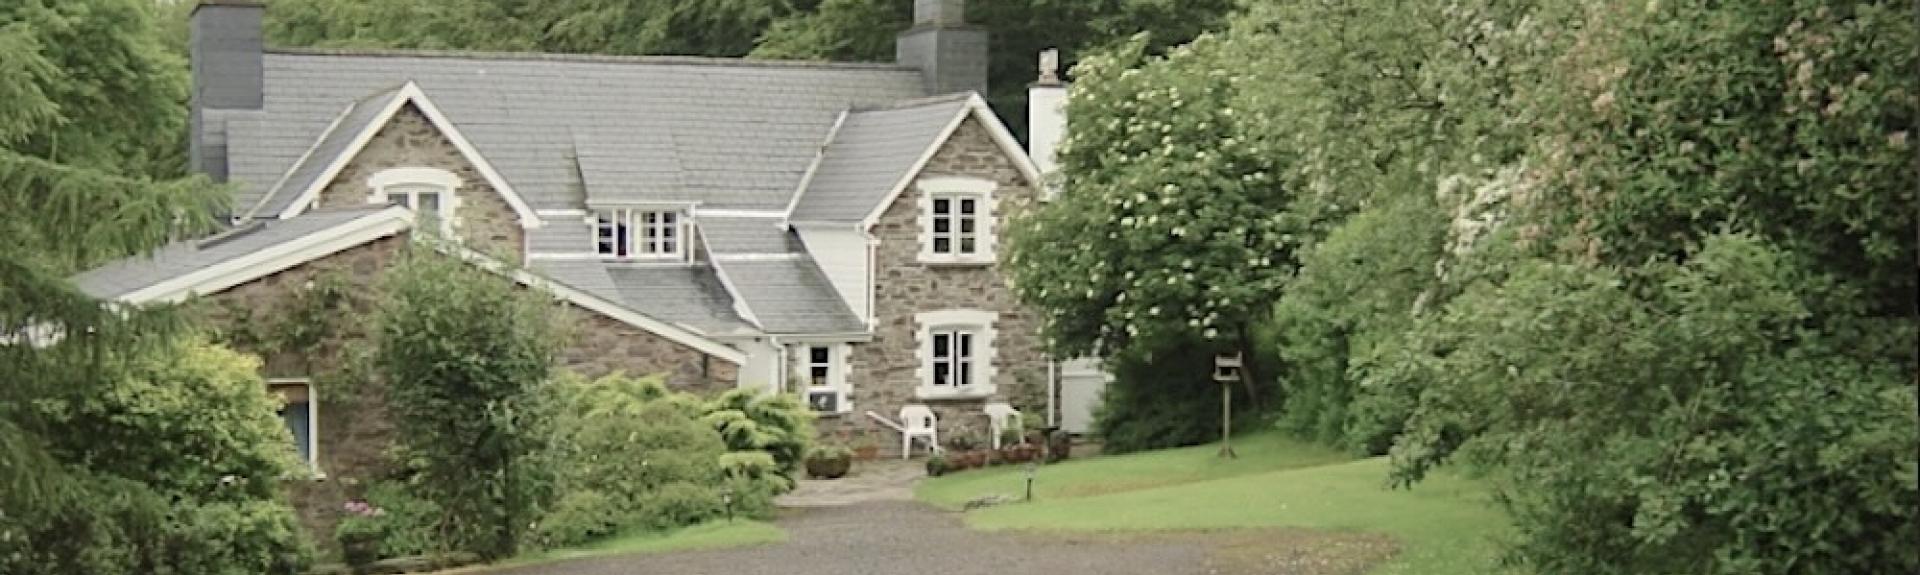 A sweeping drive approaches a twin-gabled Exmoor holiday cottage half-surrounded by mature trees.